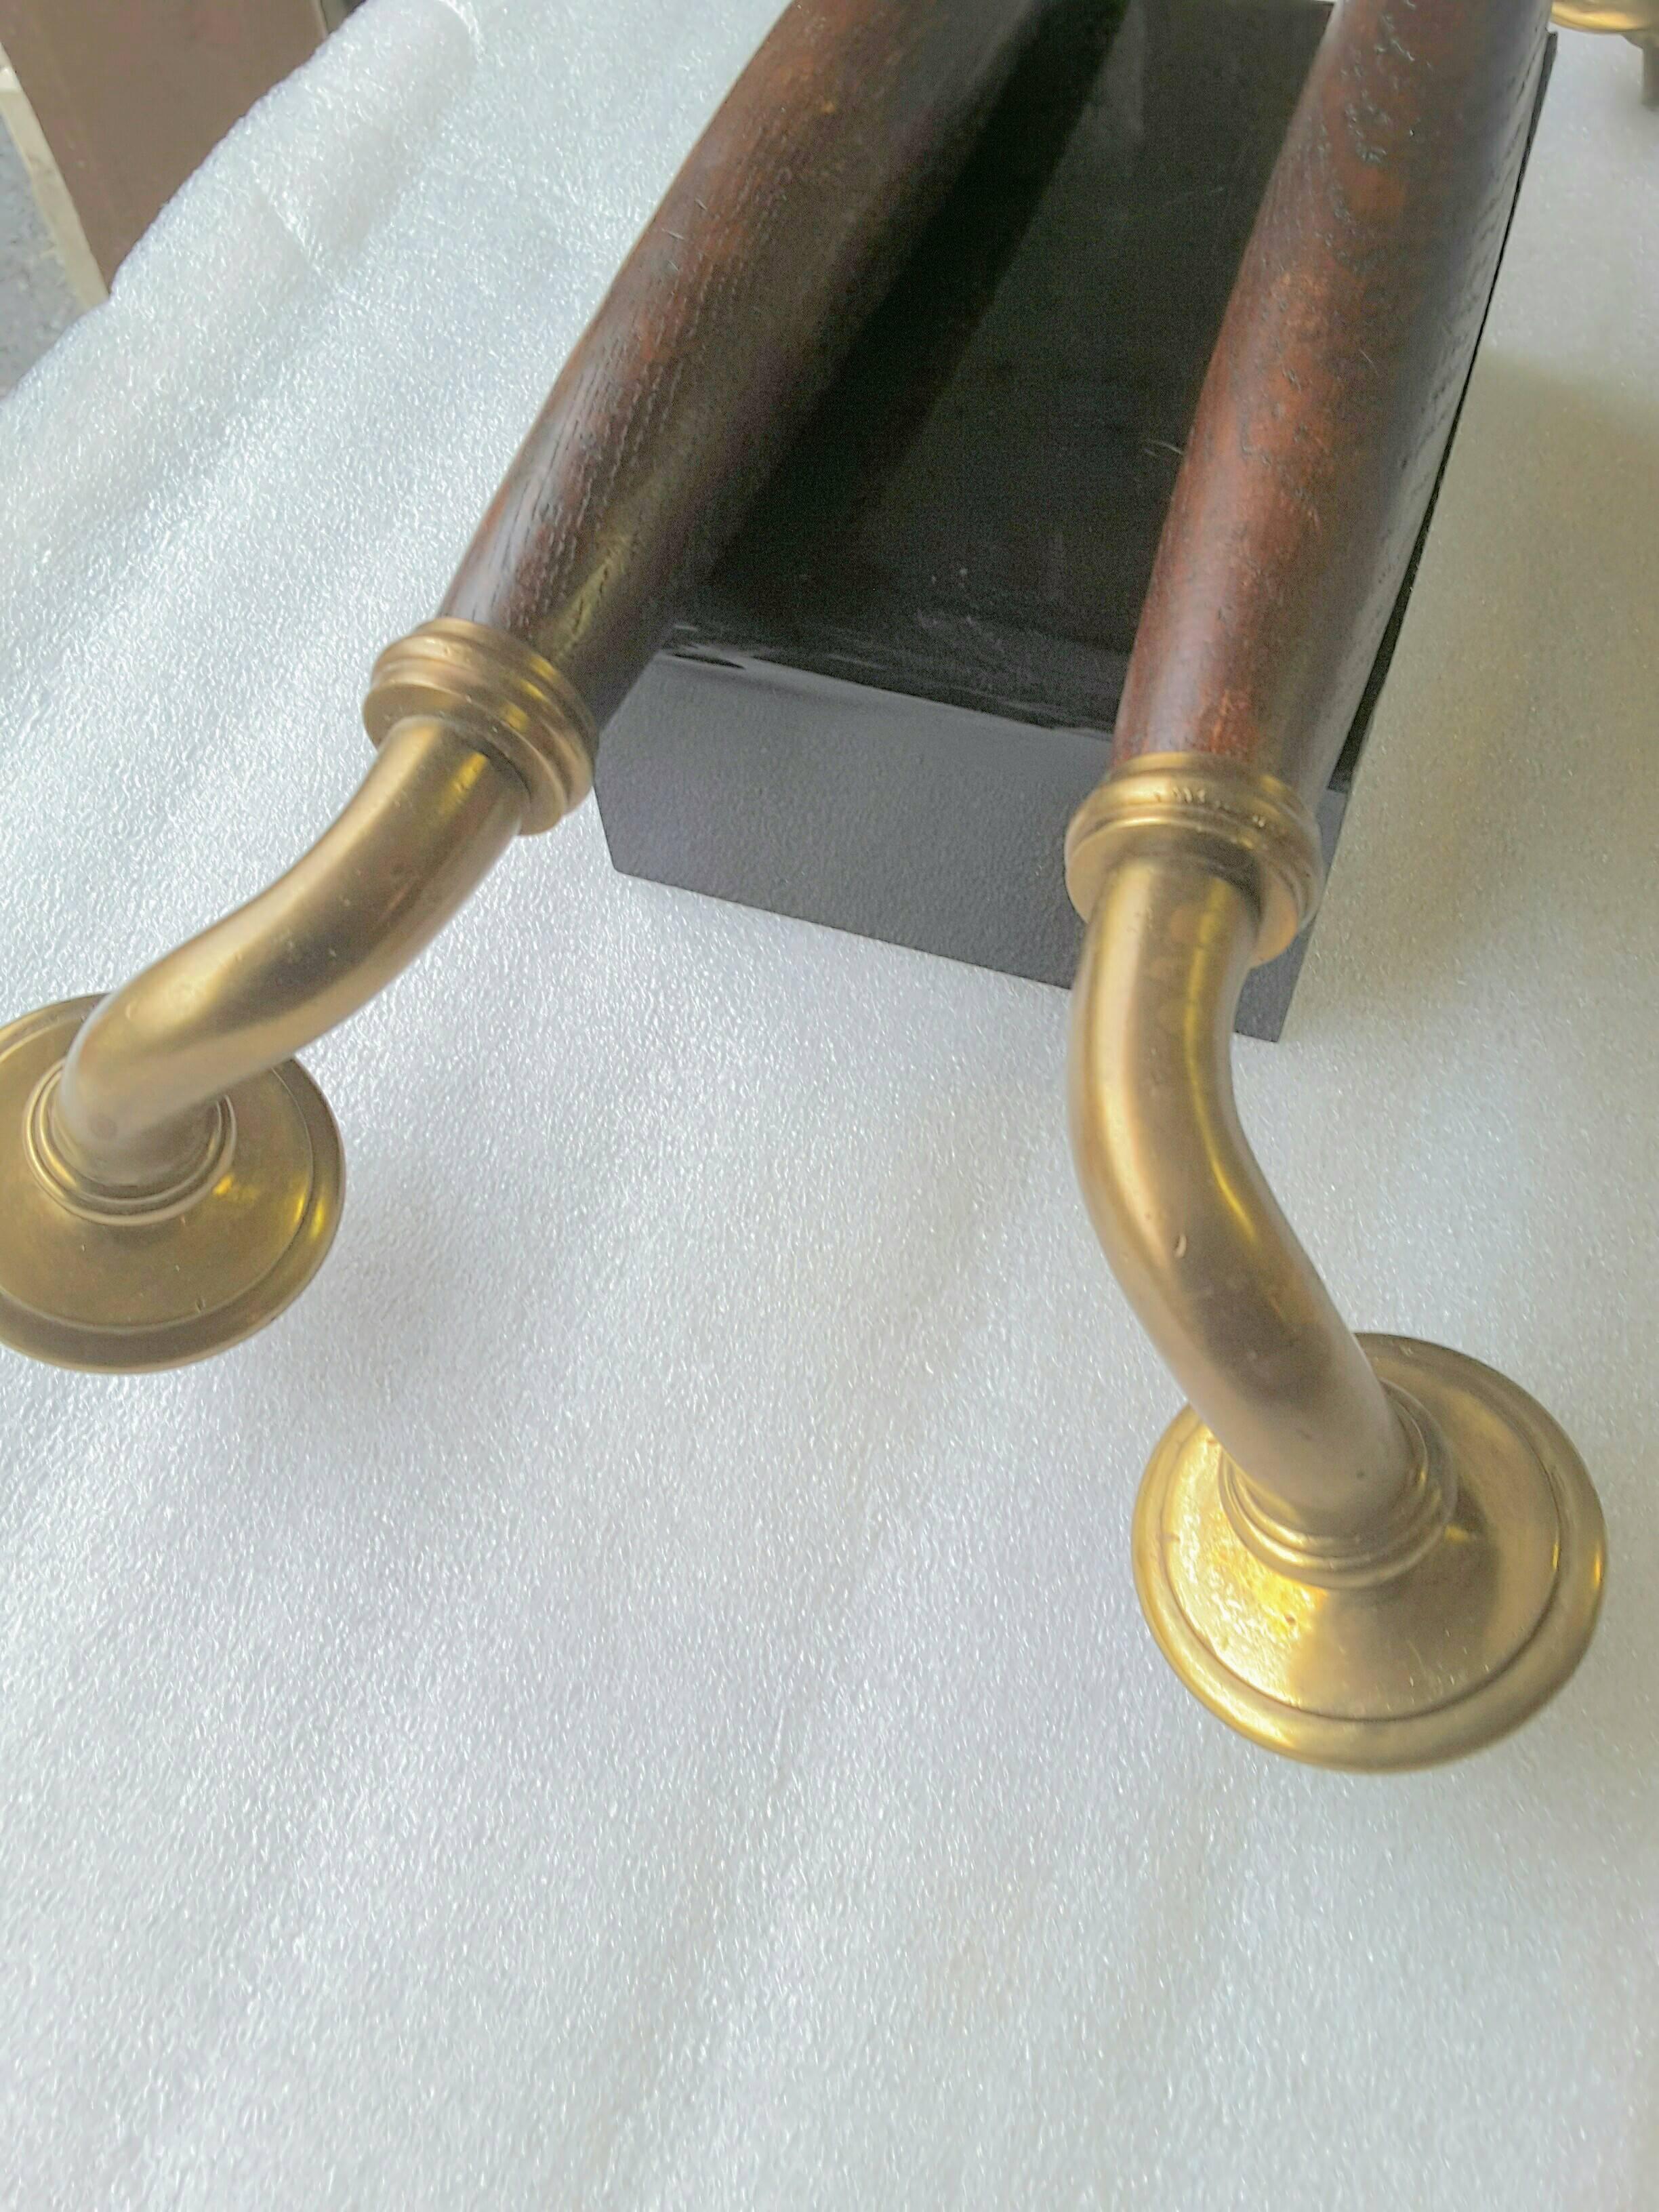 A pair of English brass and dark oak full size door pulls/handles, circa 1910, the handles are made of solid brass including the back nuts for attachment, the center for hand placement is made in solid English oak. The pulls were more likely for a